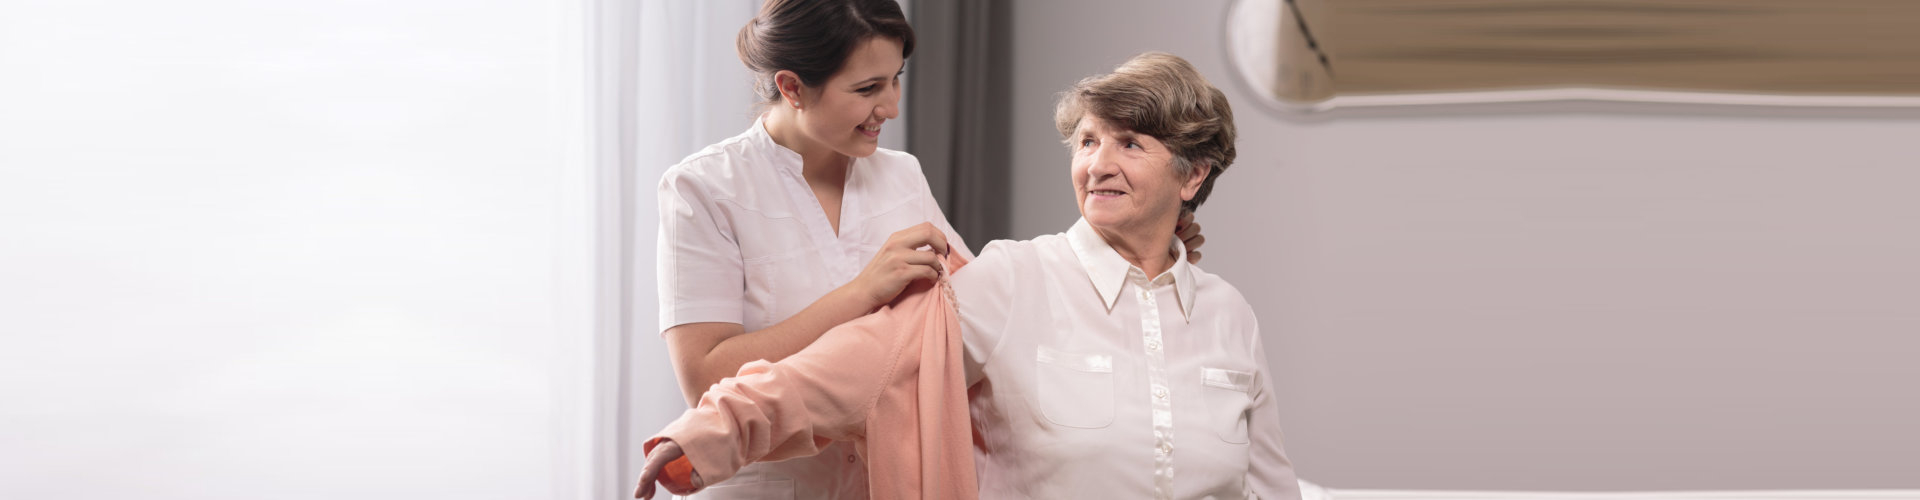 caregiver helping the patient with her clothes